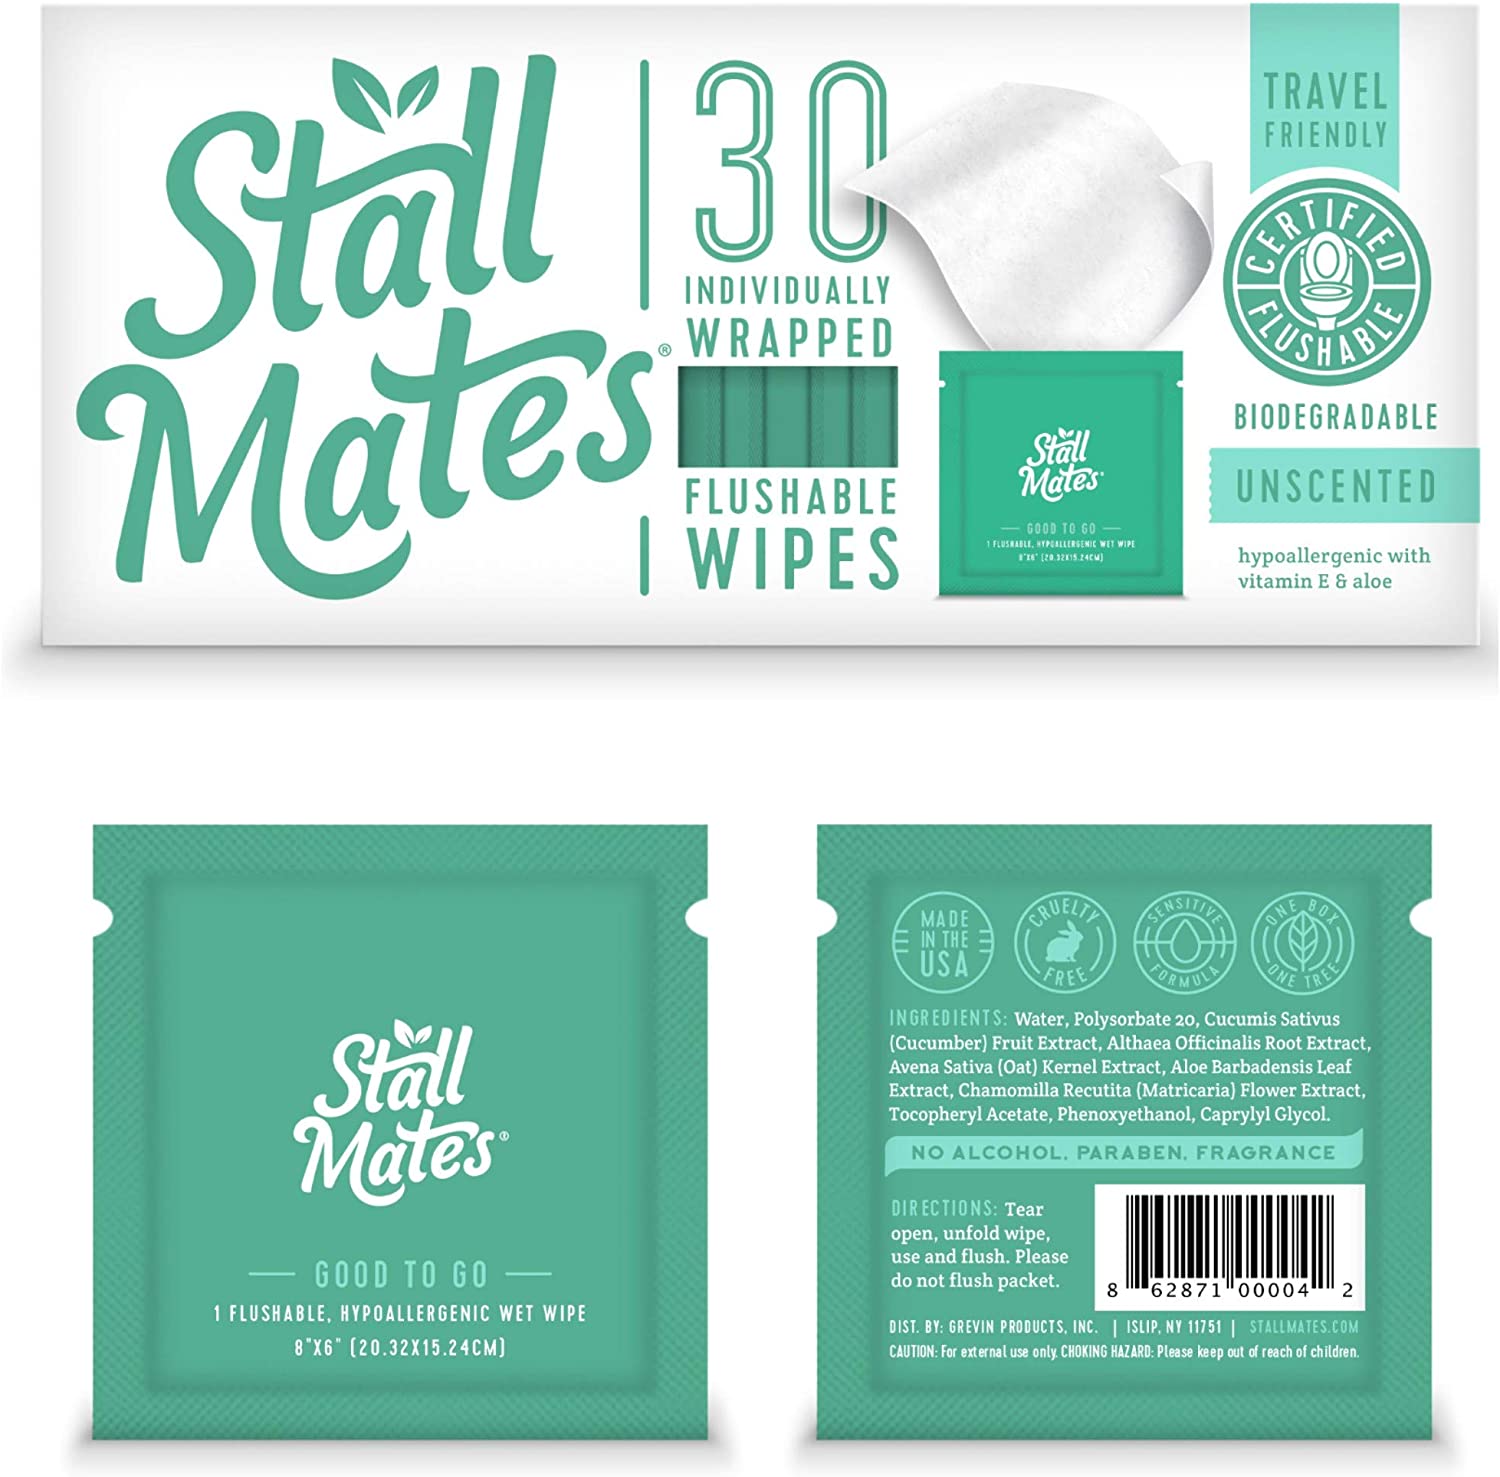 Stall Mates Biodegradable Unscented Wet Wipes For Adults, 30-Count